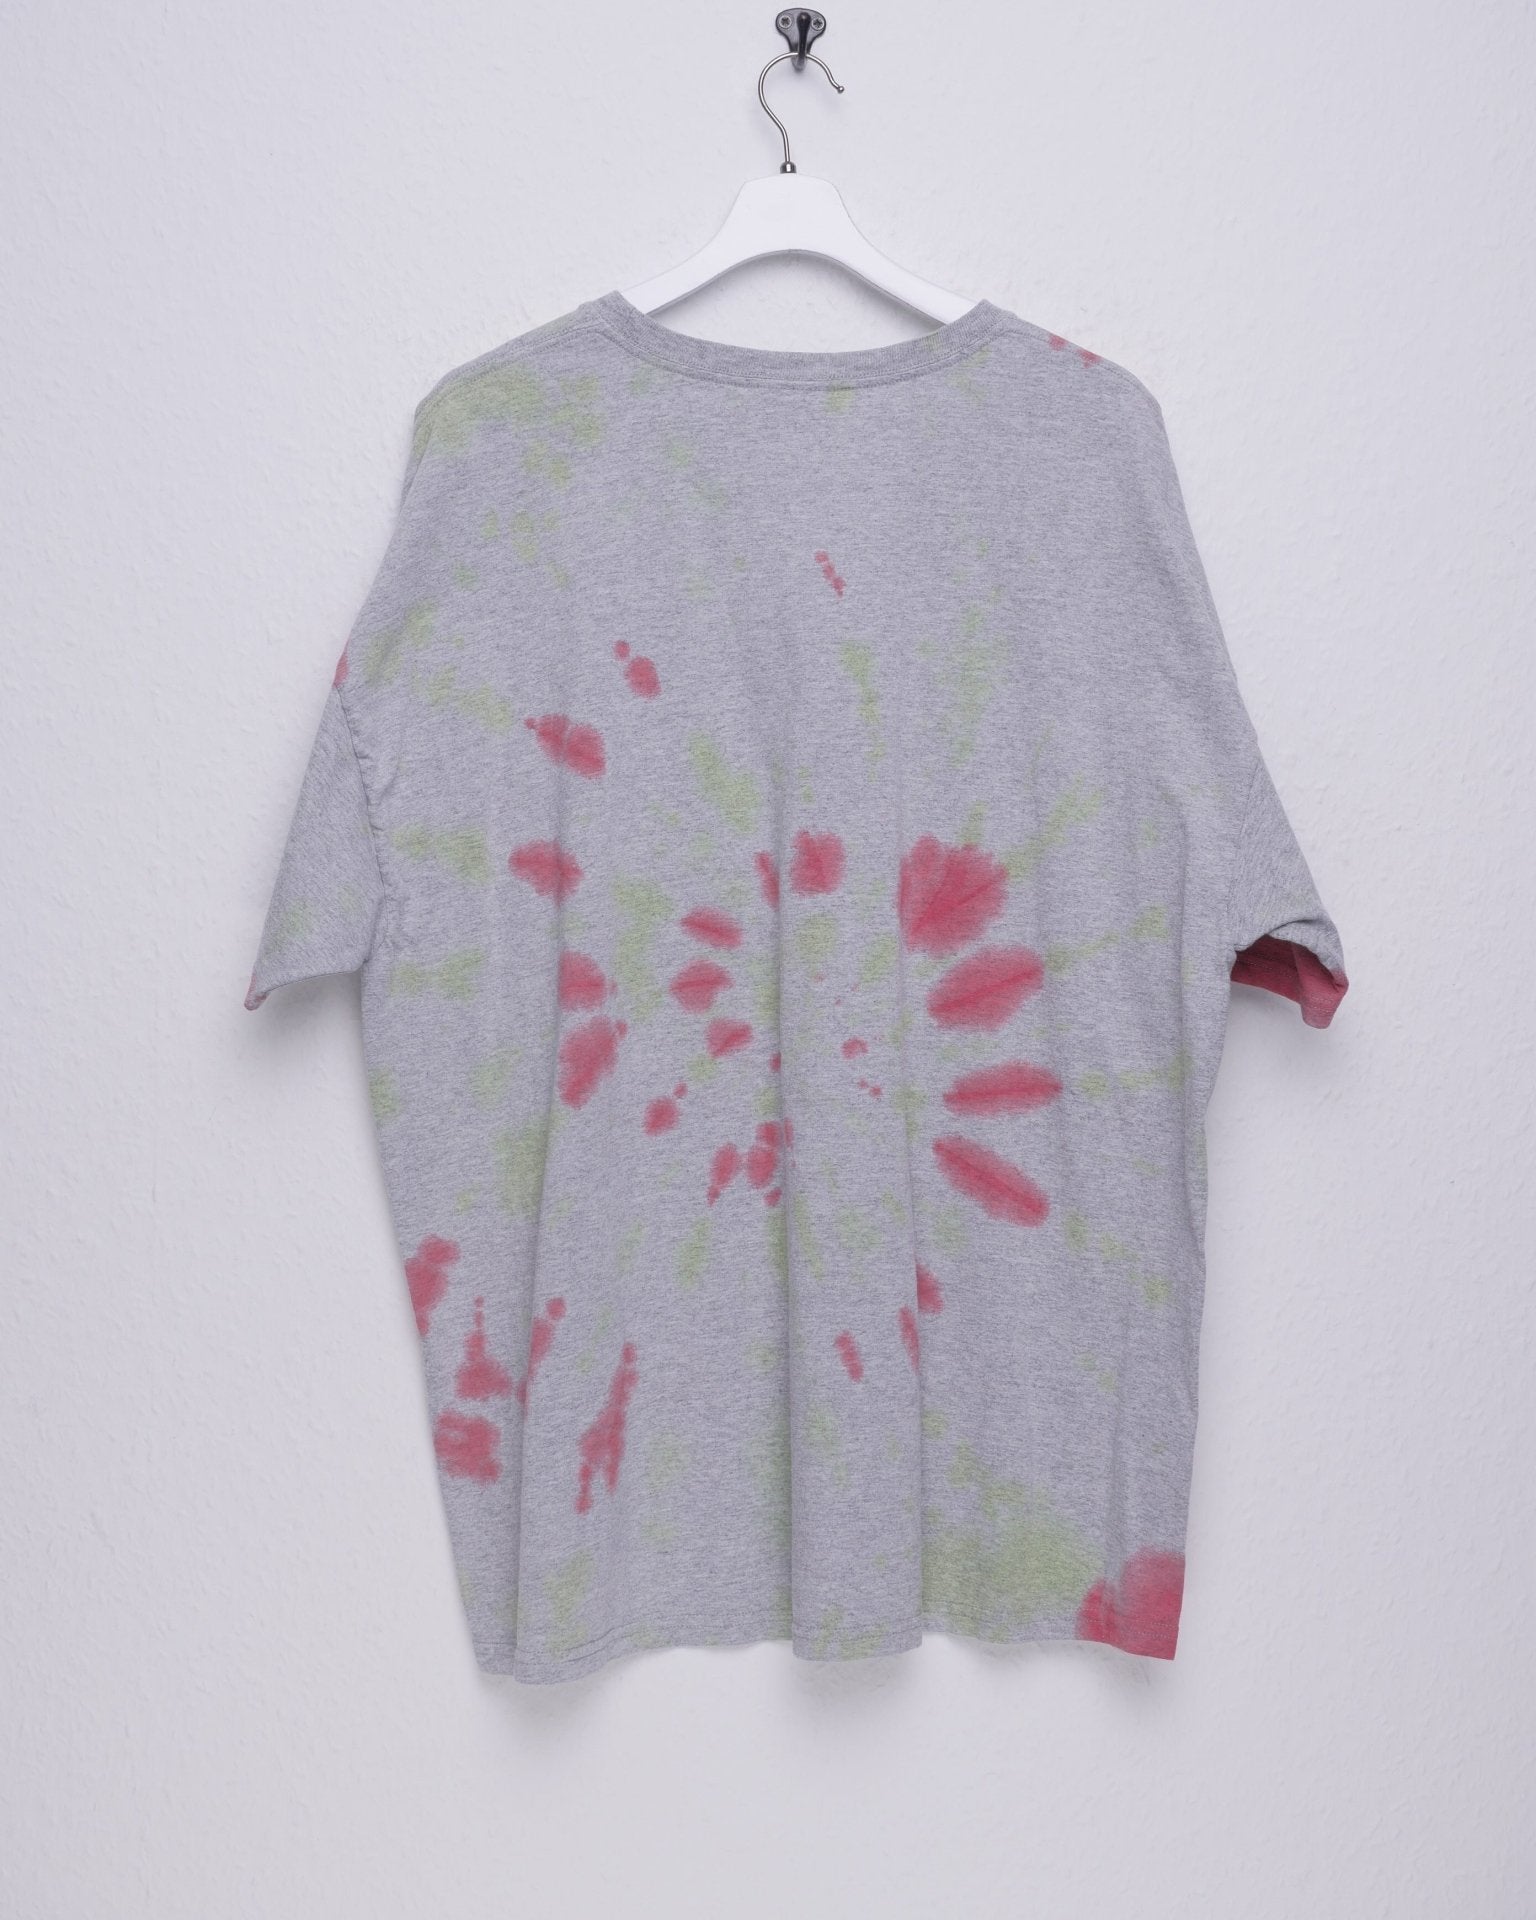 Wolverines Spellout embroidered grey oversized Tie Dye Shirt - Peeces